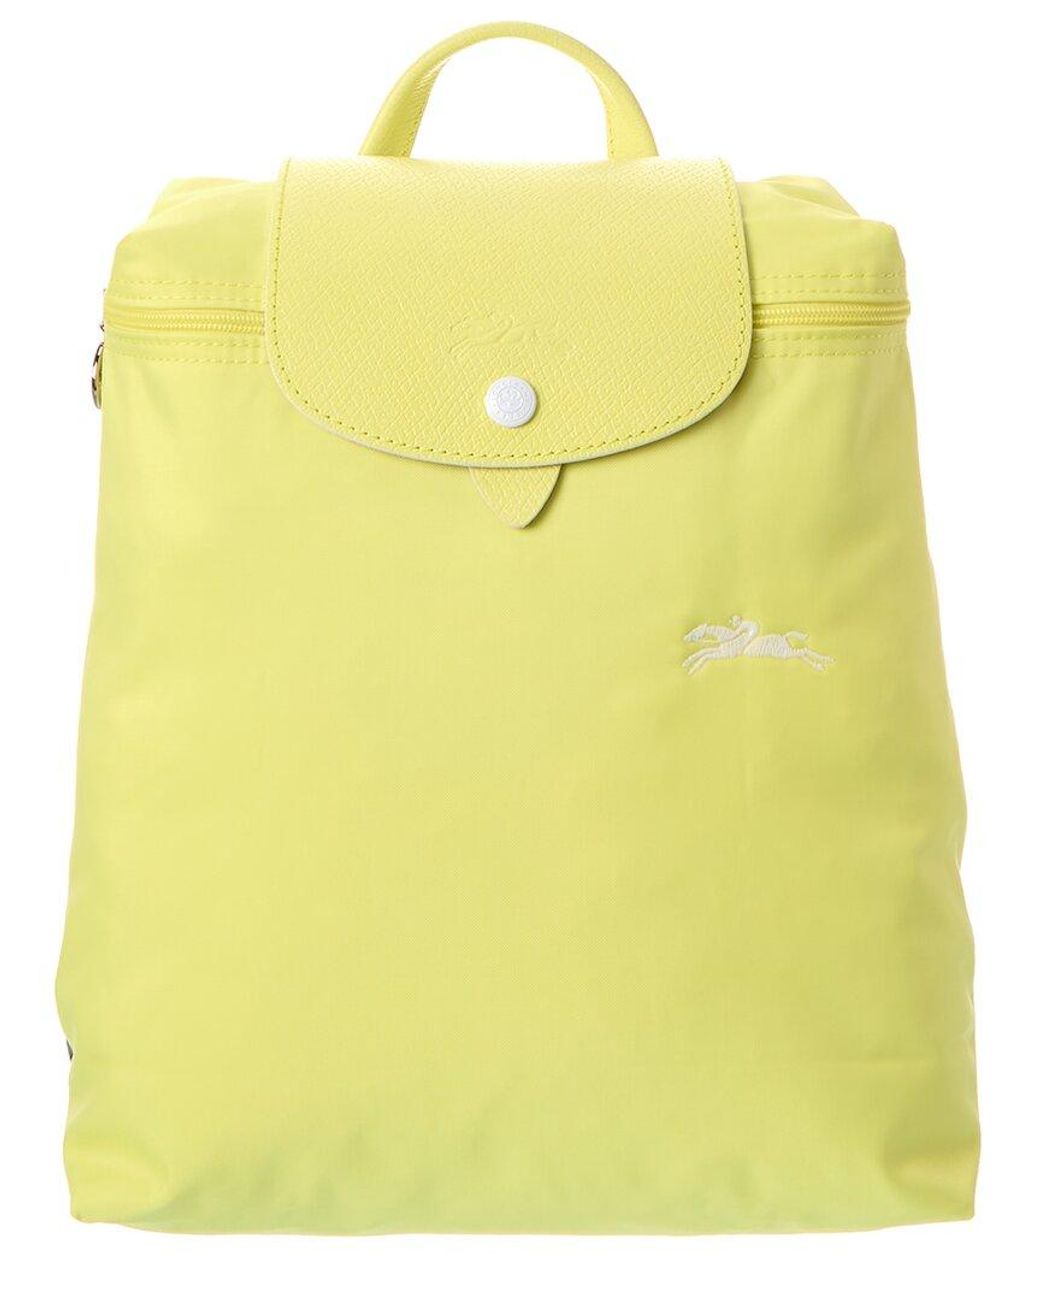 Longchamp Le Pliage Club Nylon Backpack in Yellow | Lyst